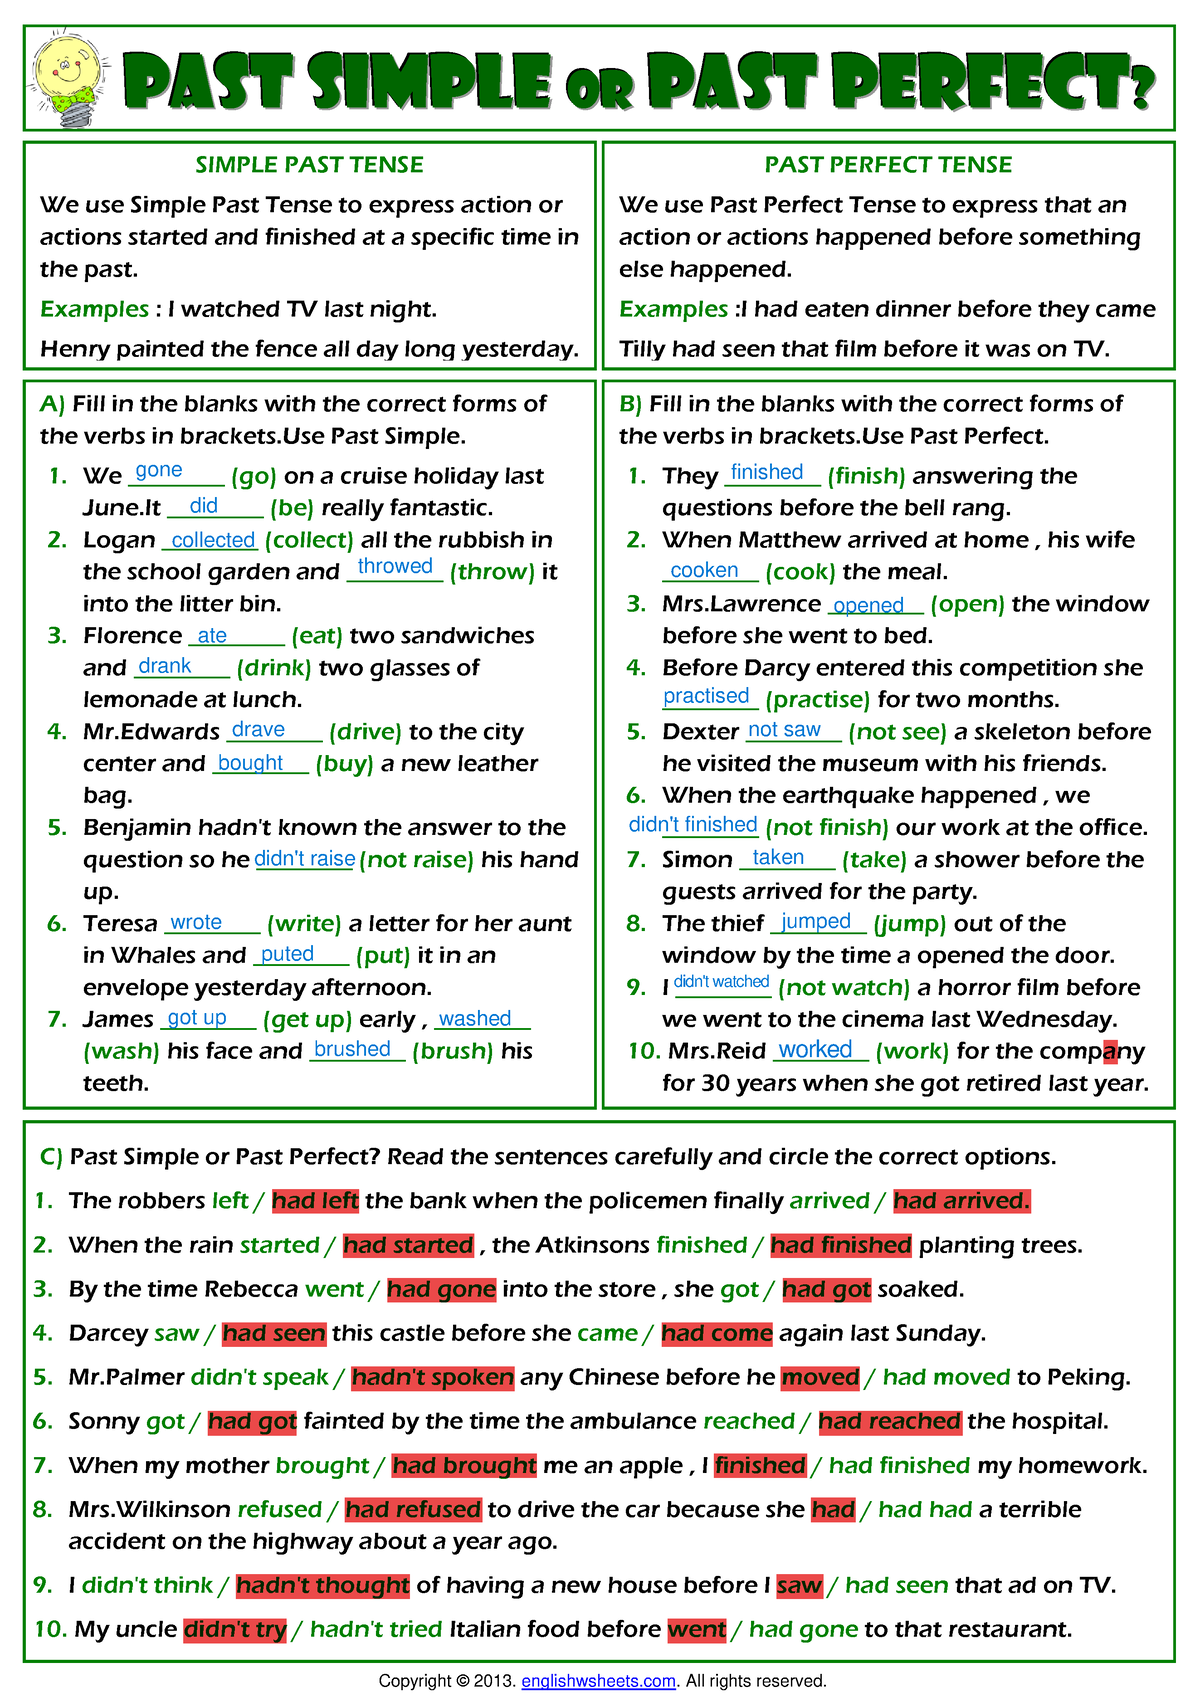 Simple past or past perfect tense - key - PPPAAASSSTTT ...